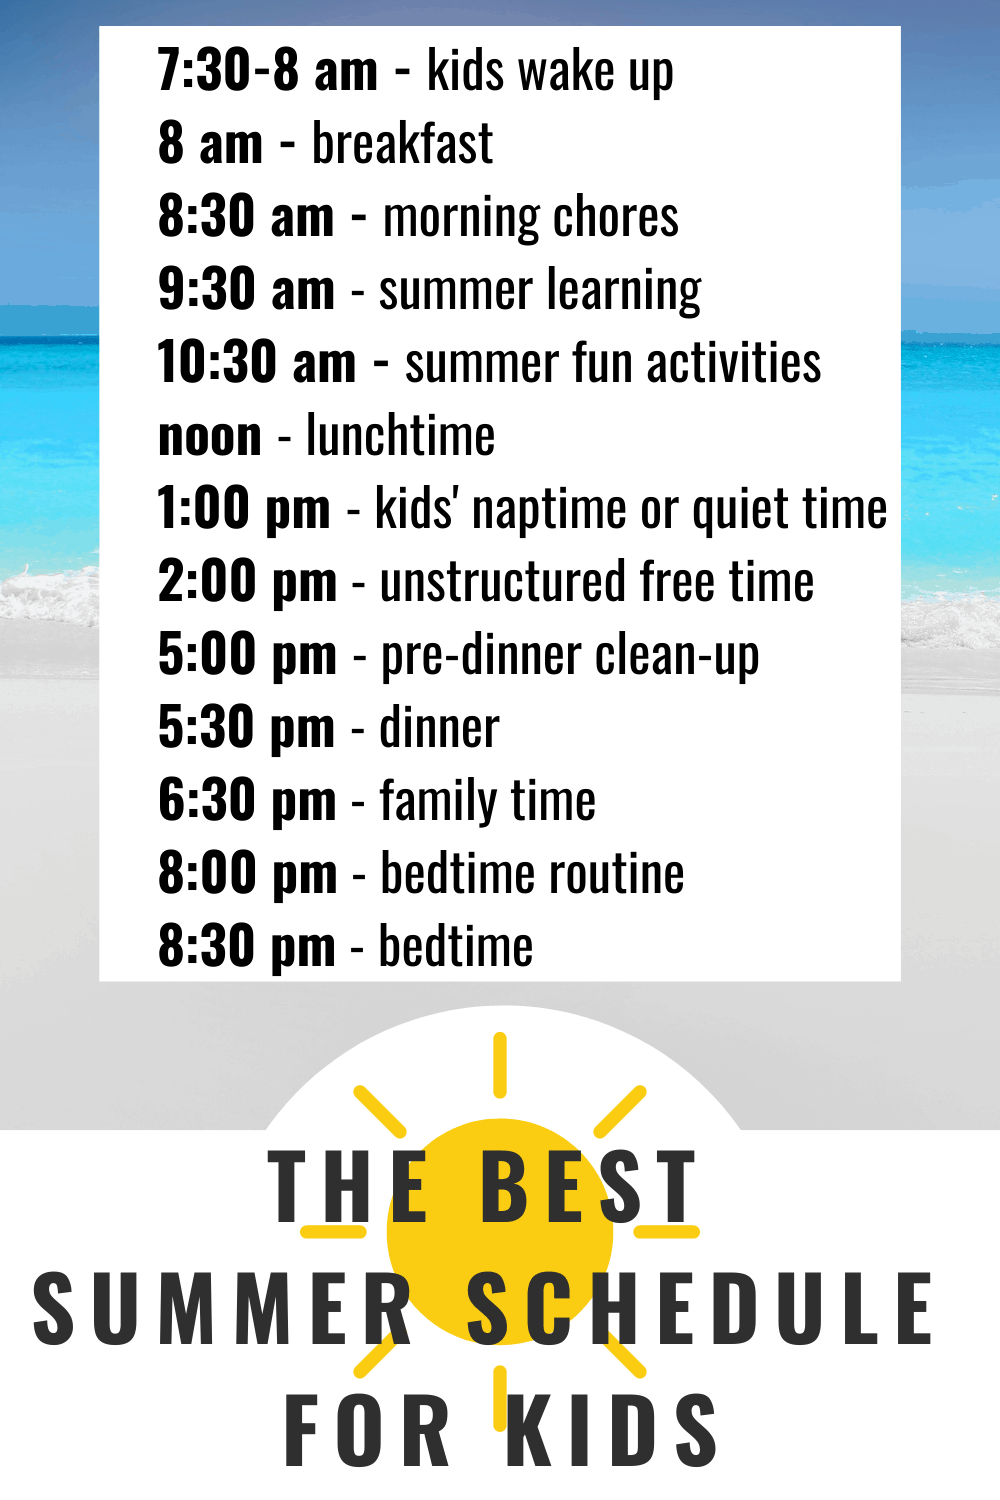 How to Create the Best Summer Schedule for Kids